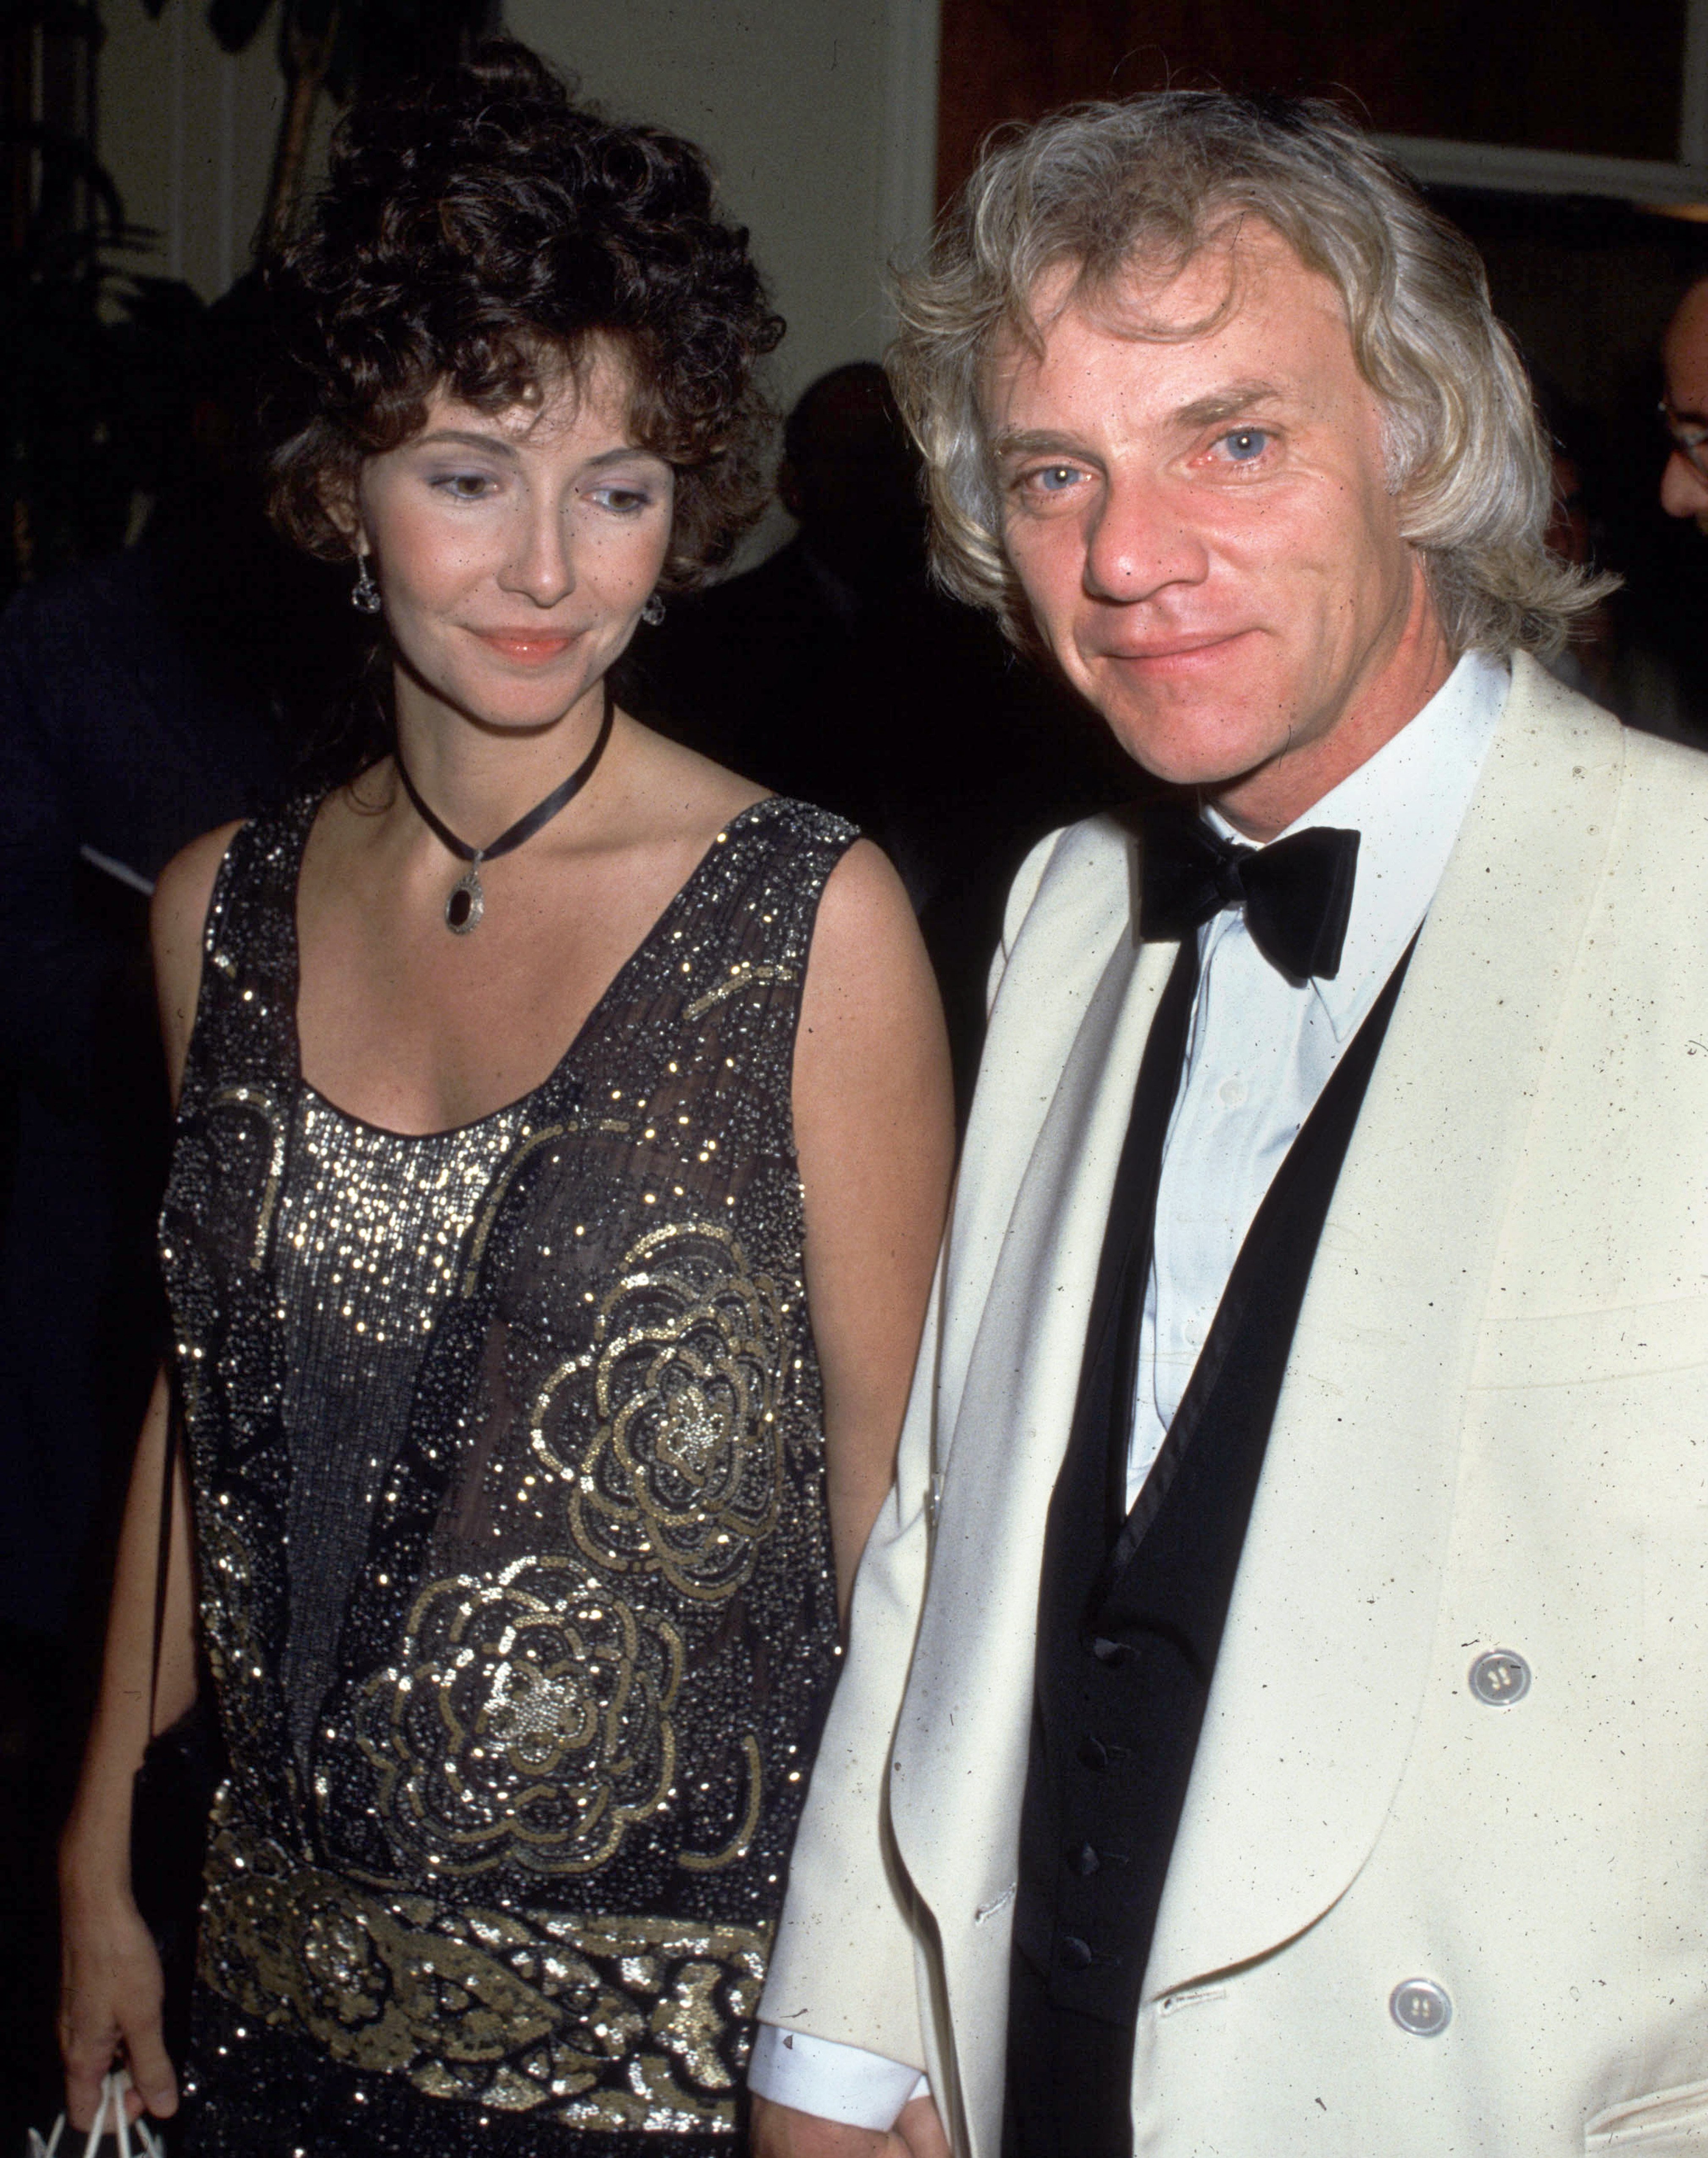 English actor Malcolm McDowell with his wife, Mary Steenburgen, at the premiere party for 'Blue Thunder' at the Beverly Hilton Hotel in Beverly Hills, California, United States. | Source: Getty Images